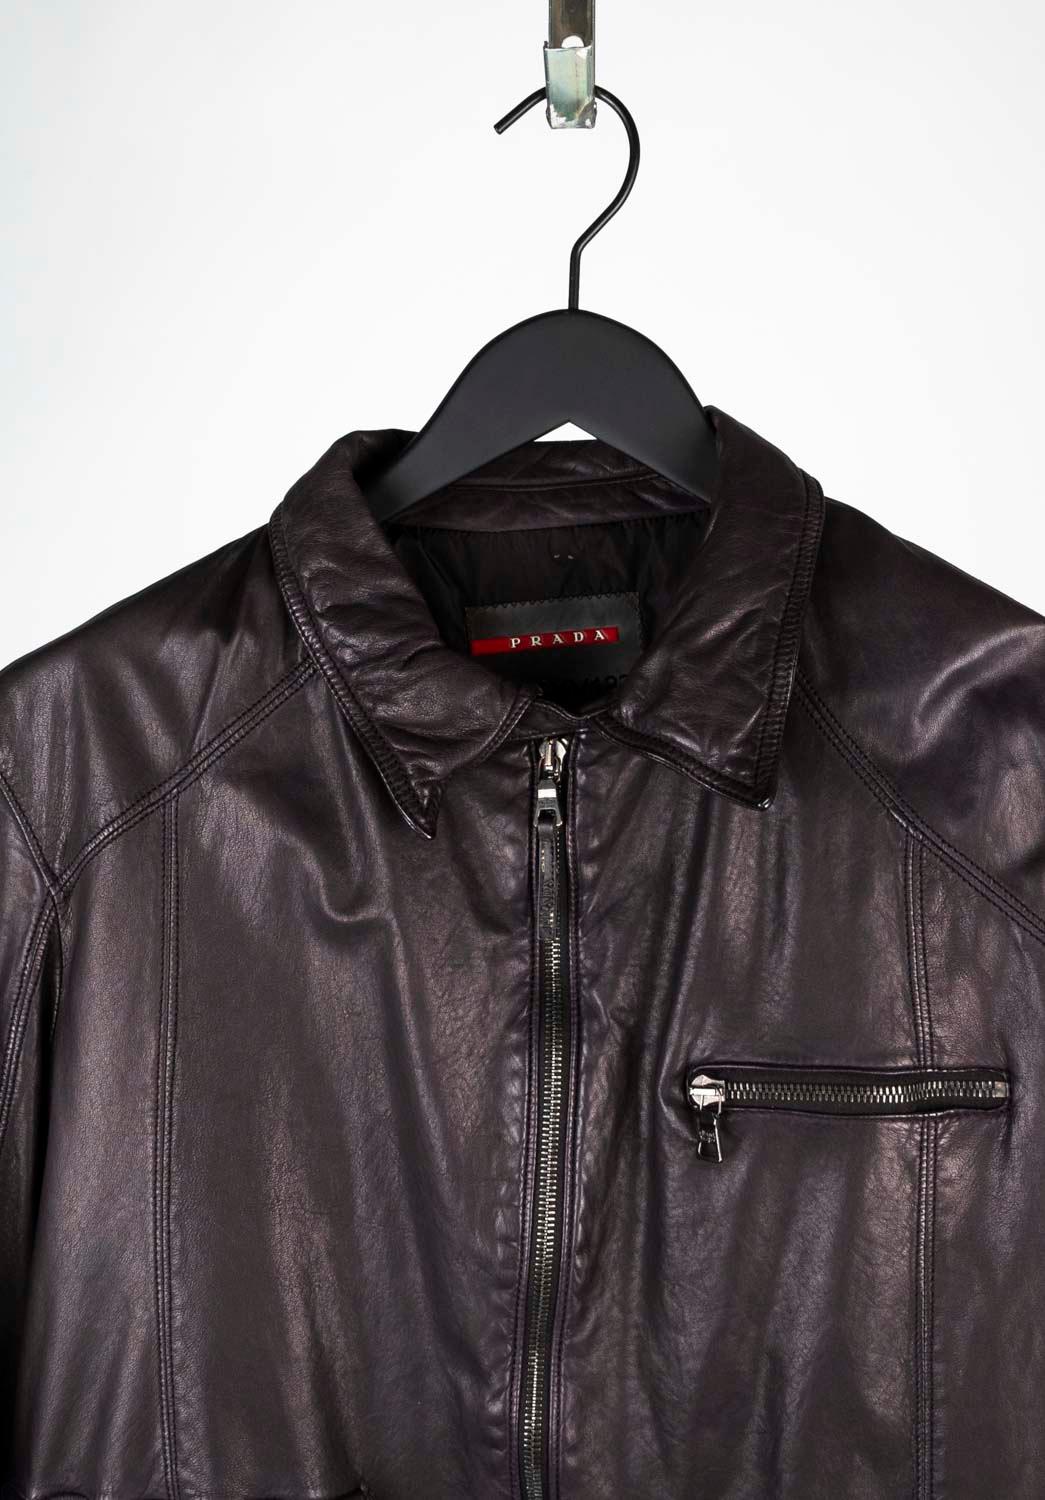 100% genuine Prada Leather Men Jacket, S562
Color: Brown
(An actual color may a bit vary due to individual computer screen interpretation)
Material: Leather
Tag size: Large
This jacket is great quality item. Rate 9 of 10, excellent condition.
Actual